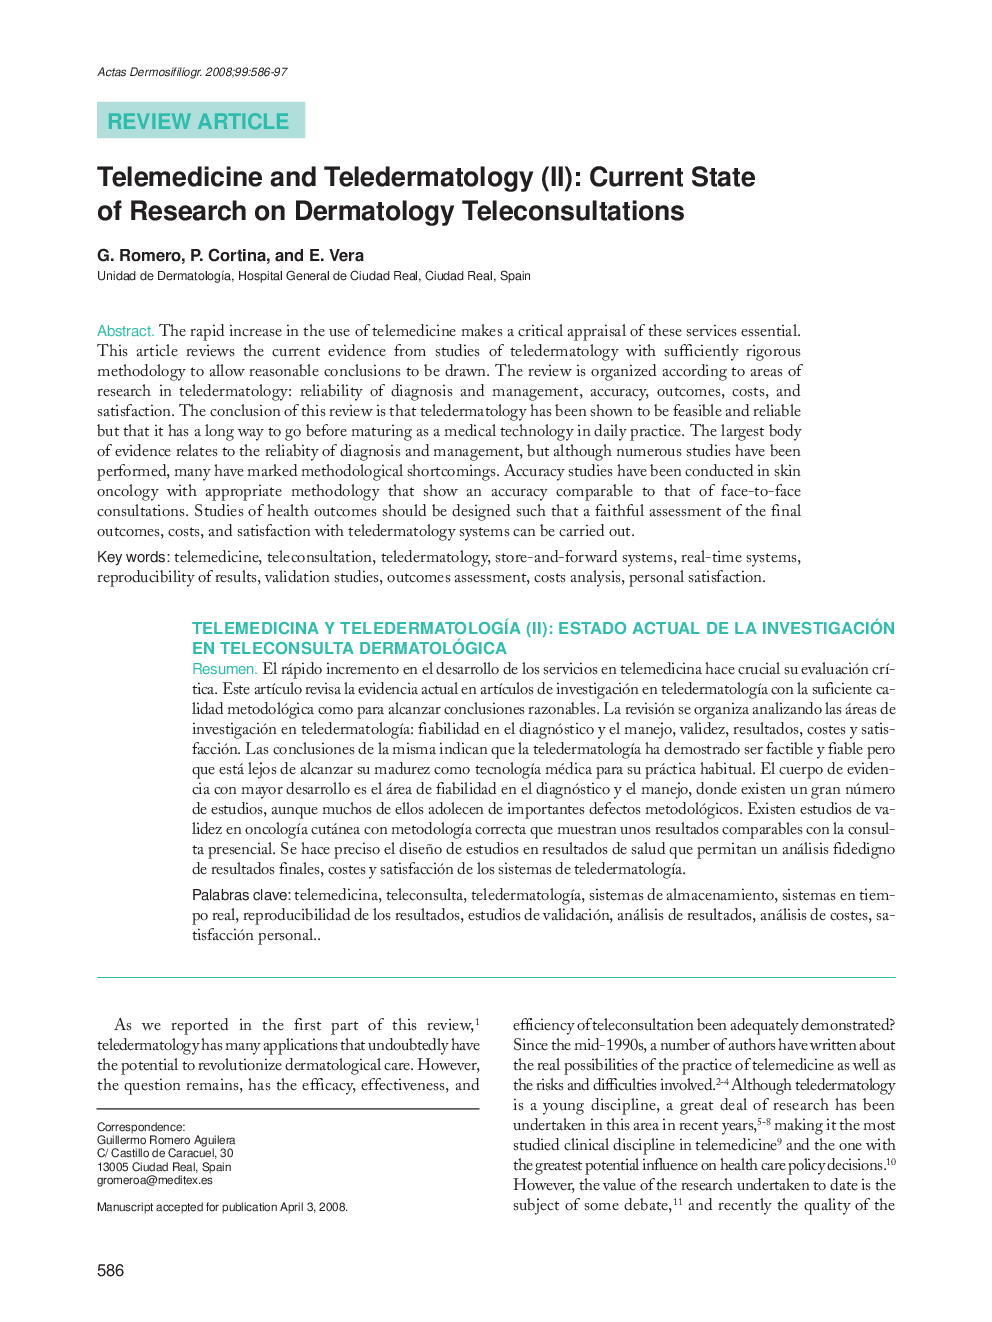 Telemedicine and Teledermatology (II): Current State of Research on Dermatology Teleconsultations